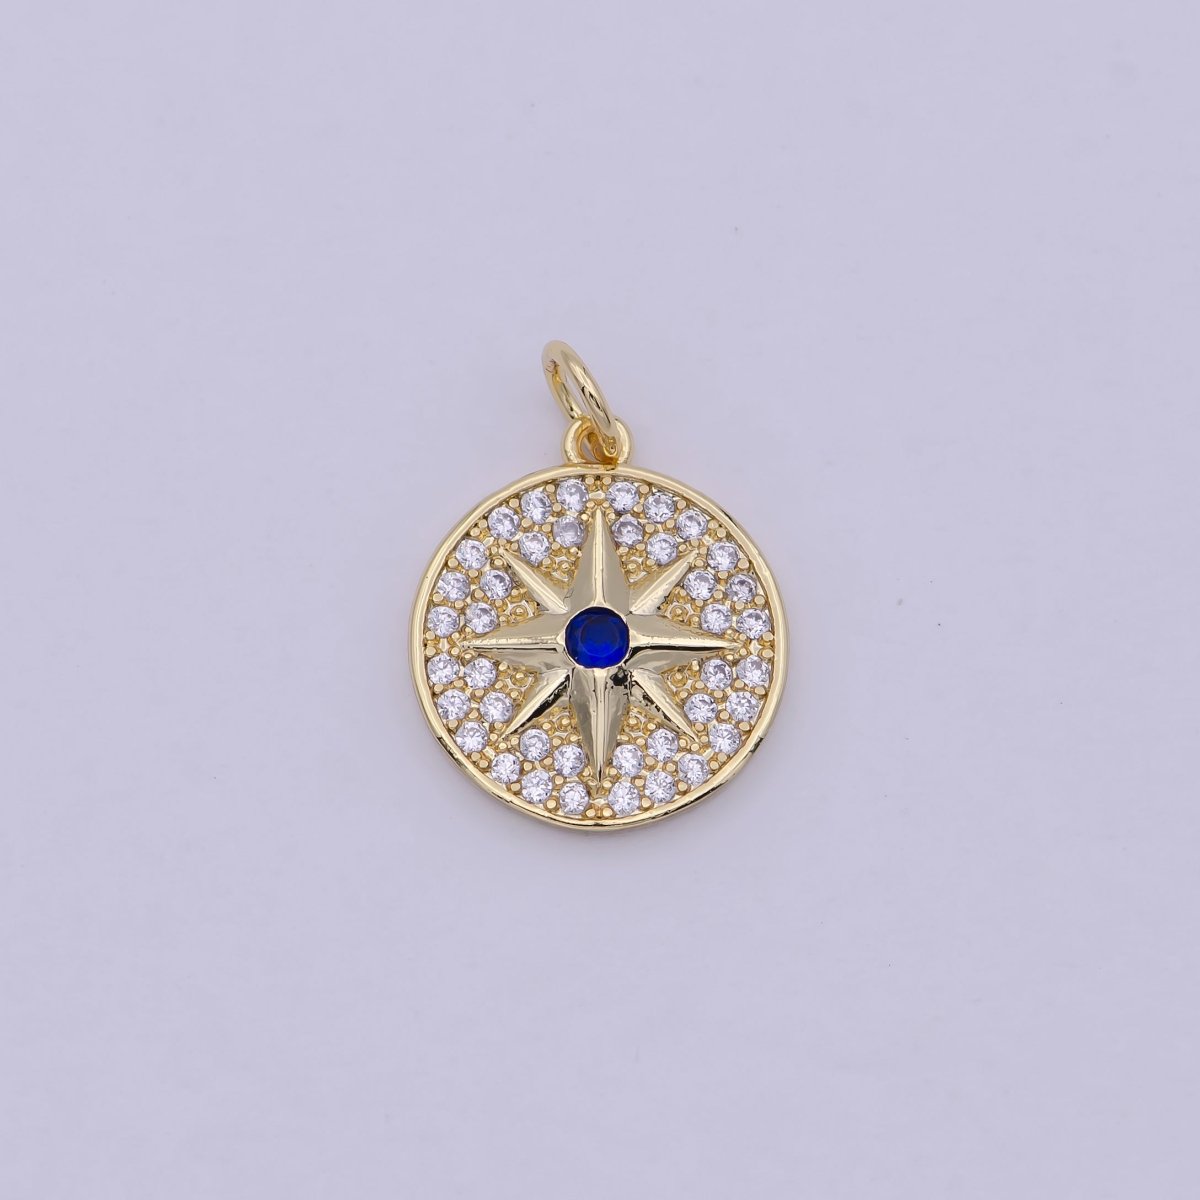 24K Gold Filled Micro Paved Blue Celestial Polaris North Star Coin Charm | C-194 - DLUXCA